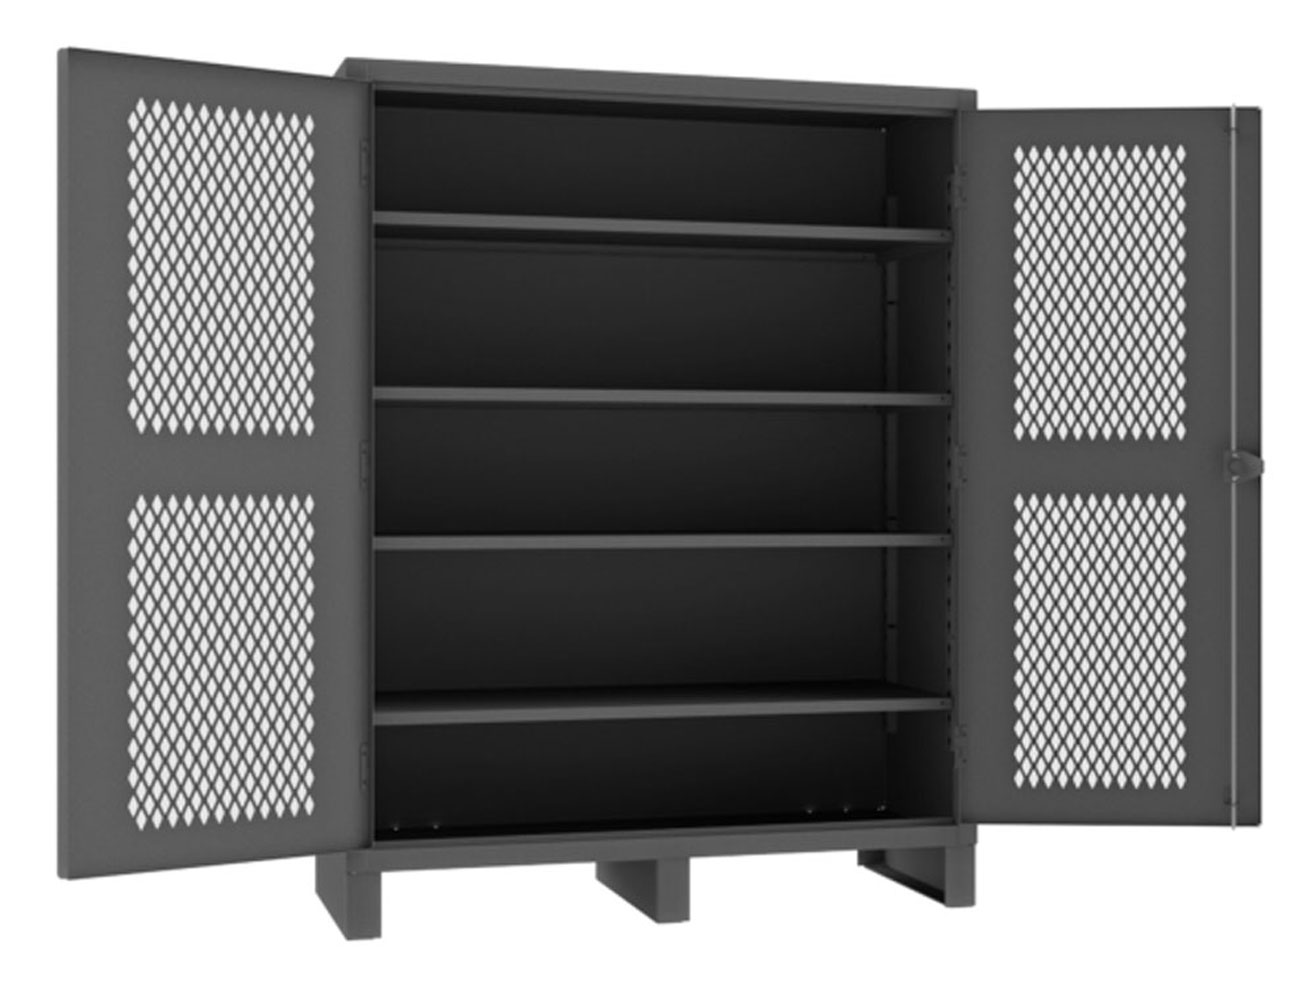 Strong Hold Extreme Duty 12 GA Bin Cabinet with 4 Shelves - 48 in. W x 24 in. D x 78 in. H - 46-BS-244